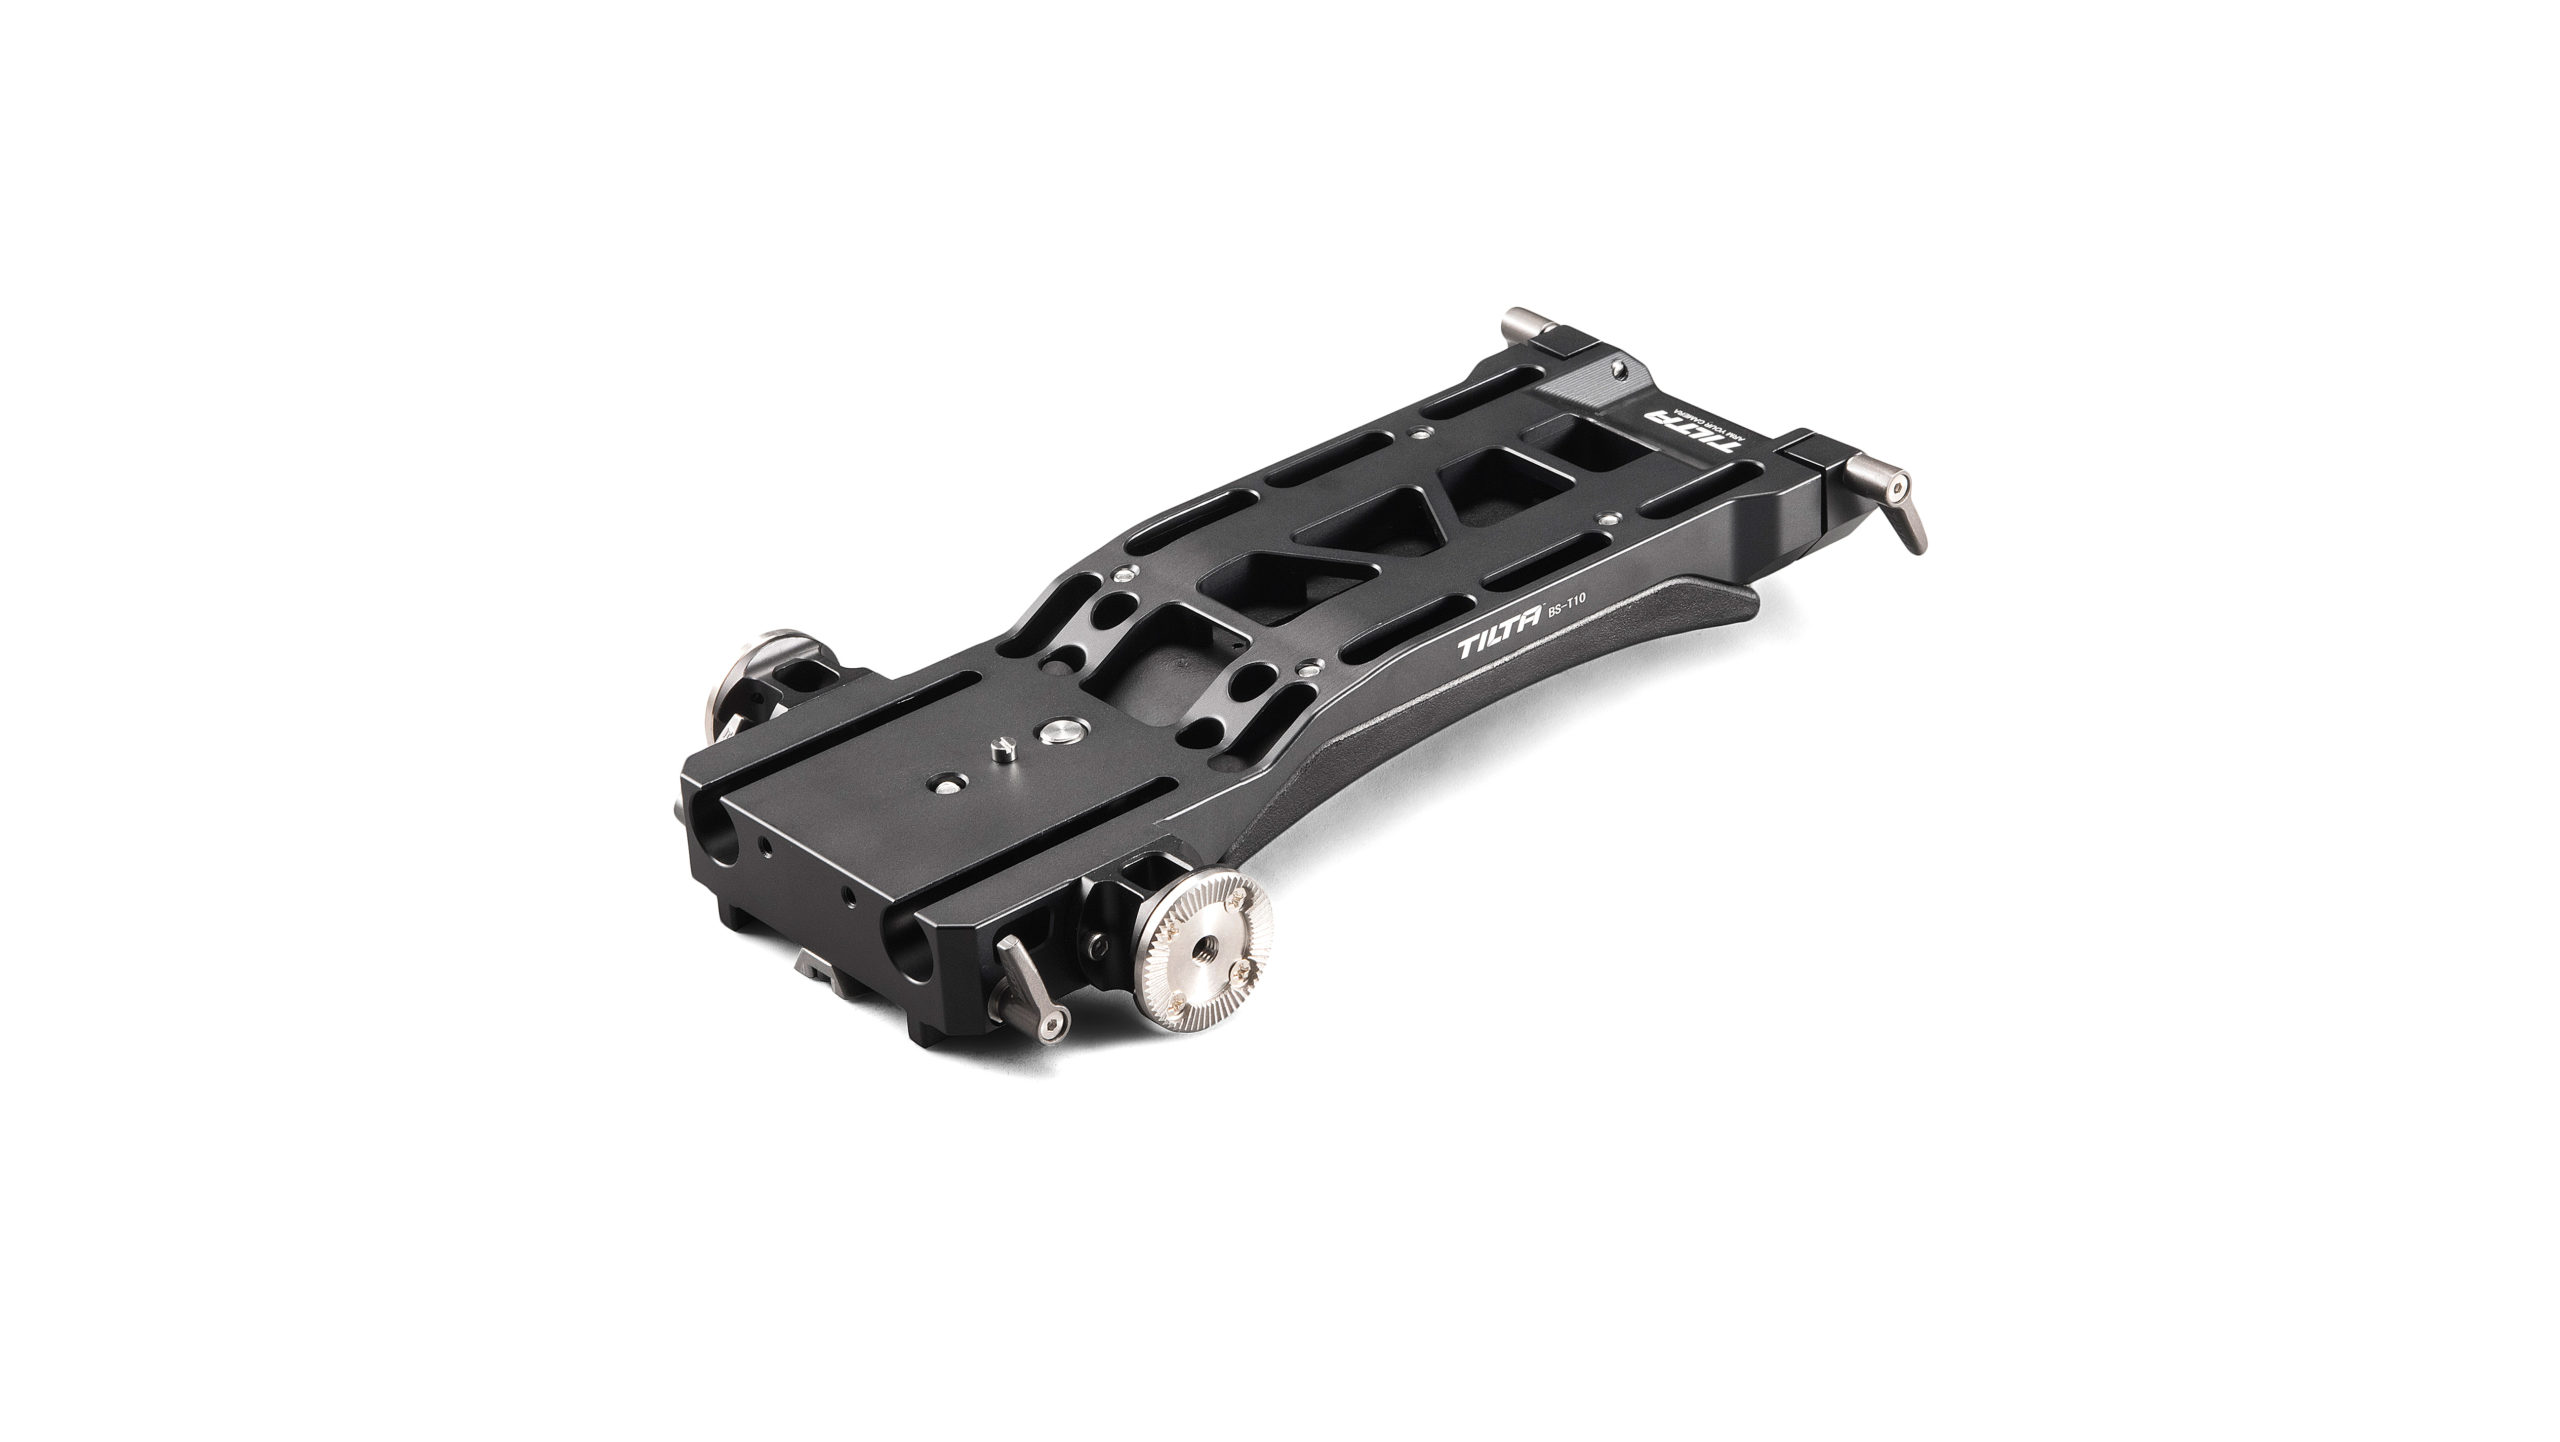 15mm LWS Professional Quick Release Baseplate for Sony FS7